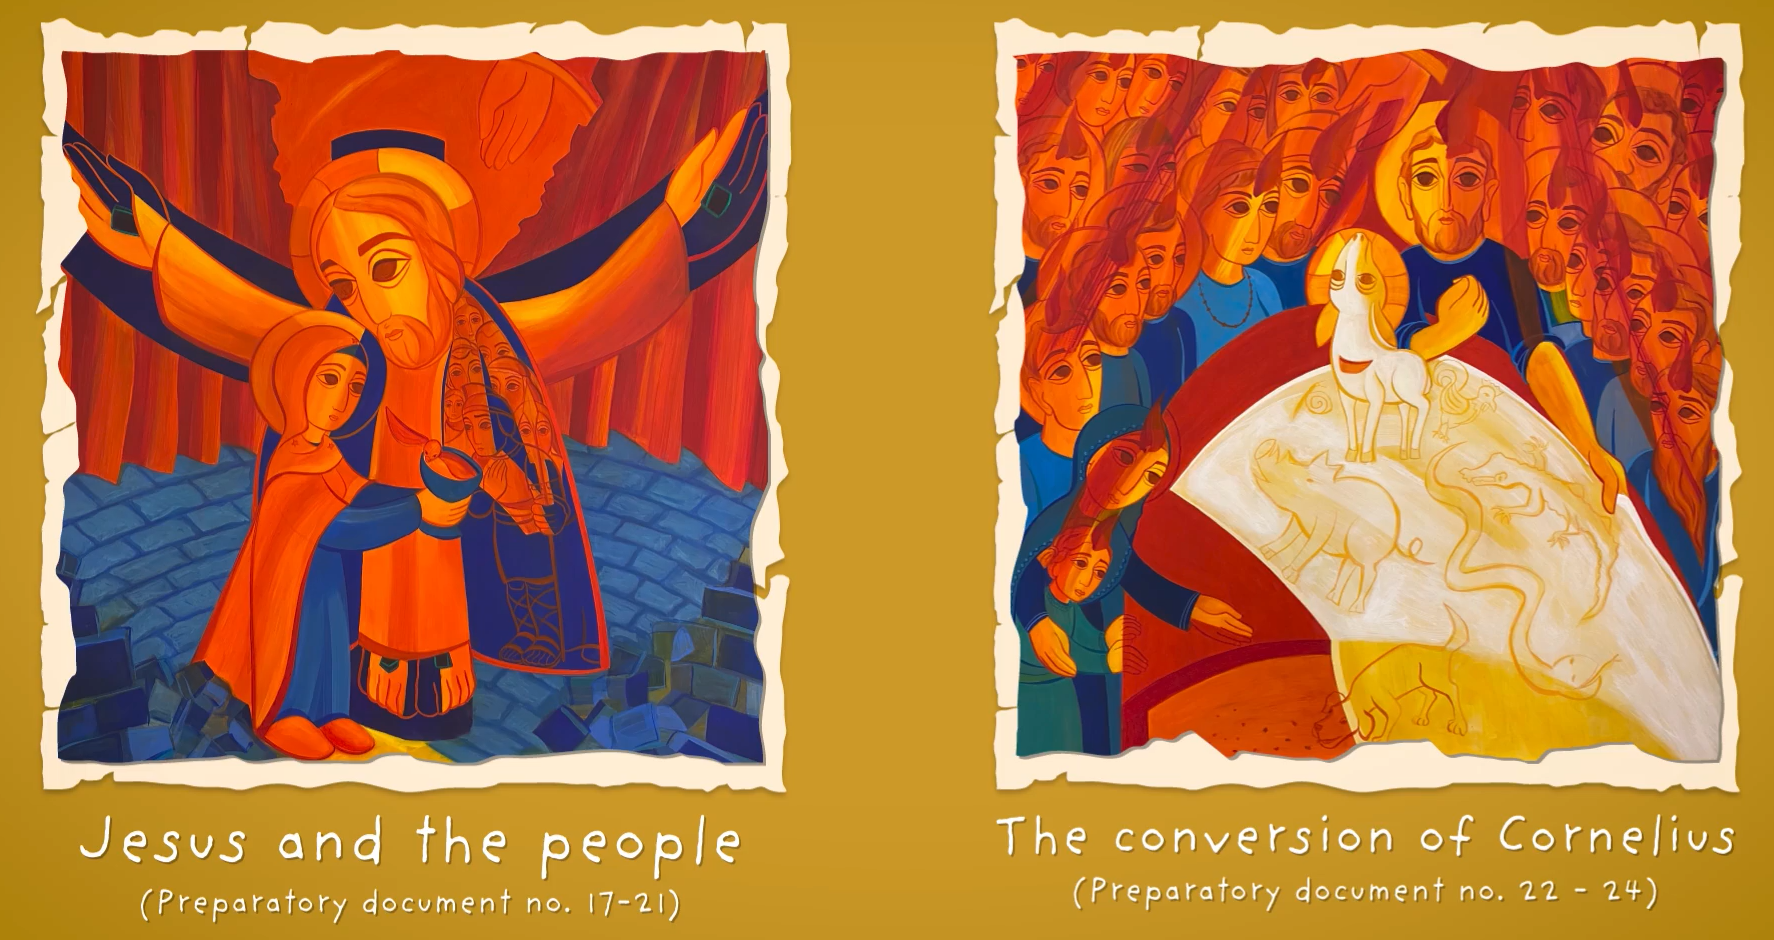 Click on the image to watch an explanation of the two icons of our Synod on Synodality